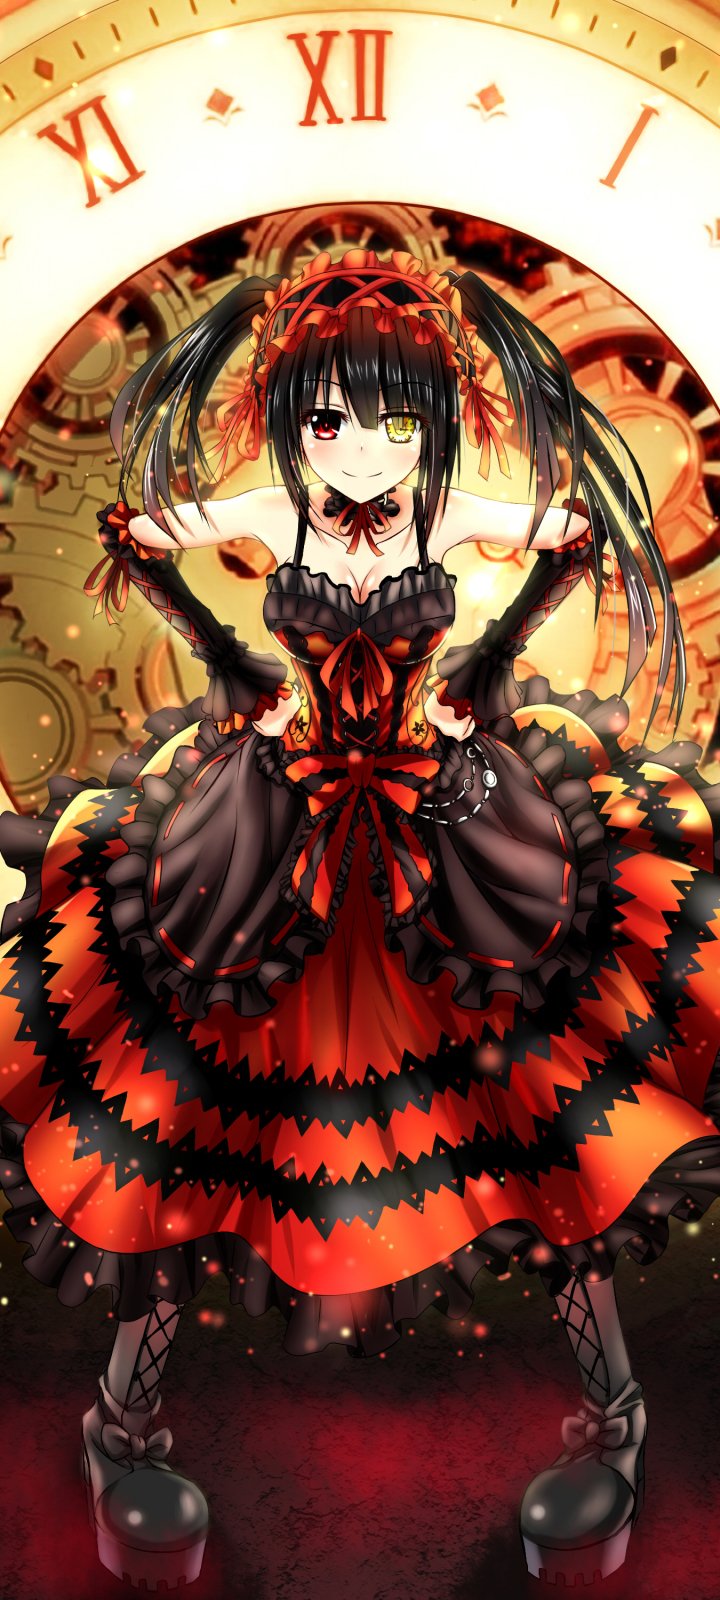 Anime/Date A Live (720x1600) Wallpaper ID: 849257 - Mobile Abyss